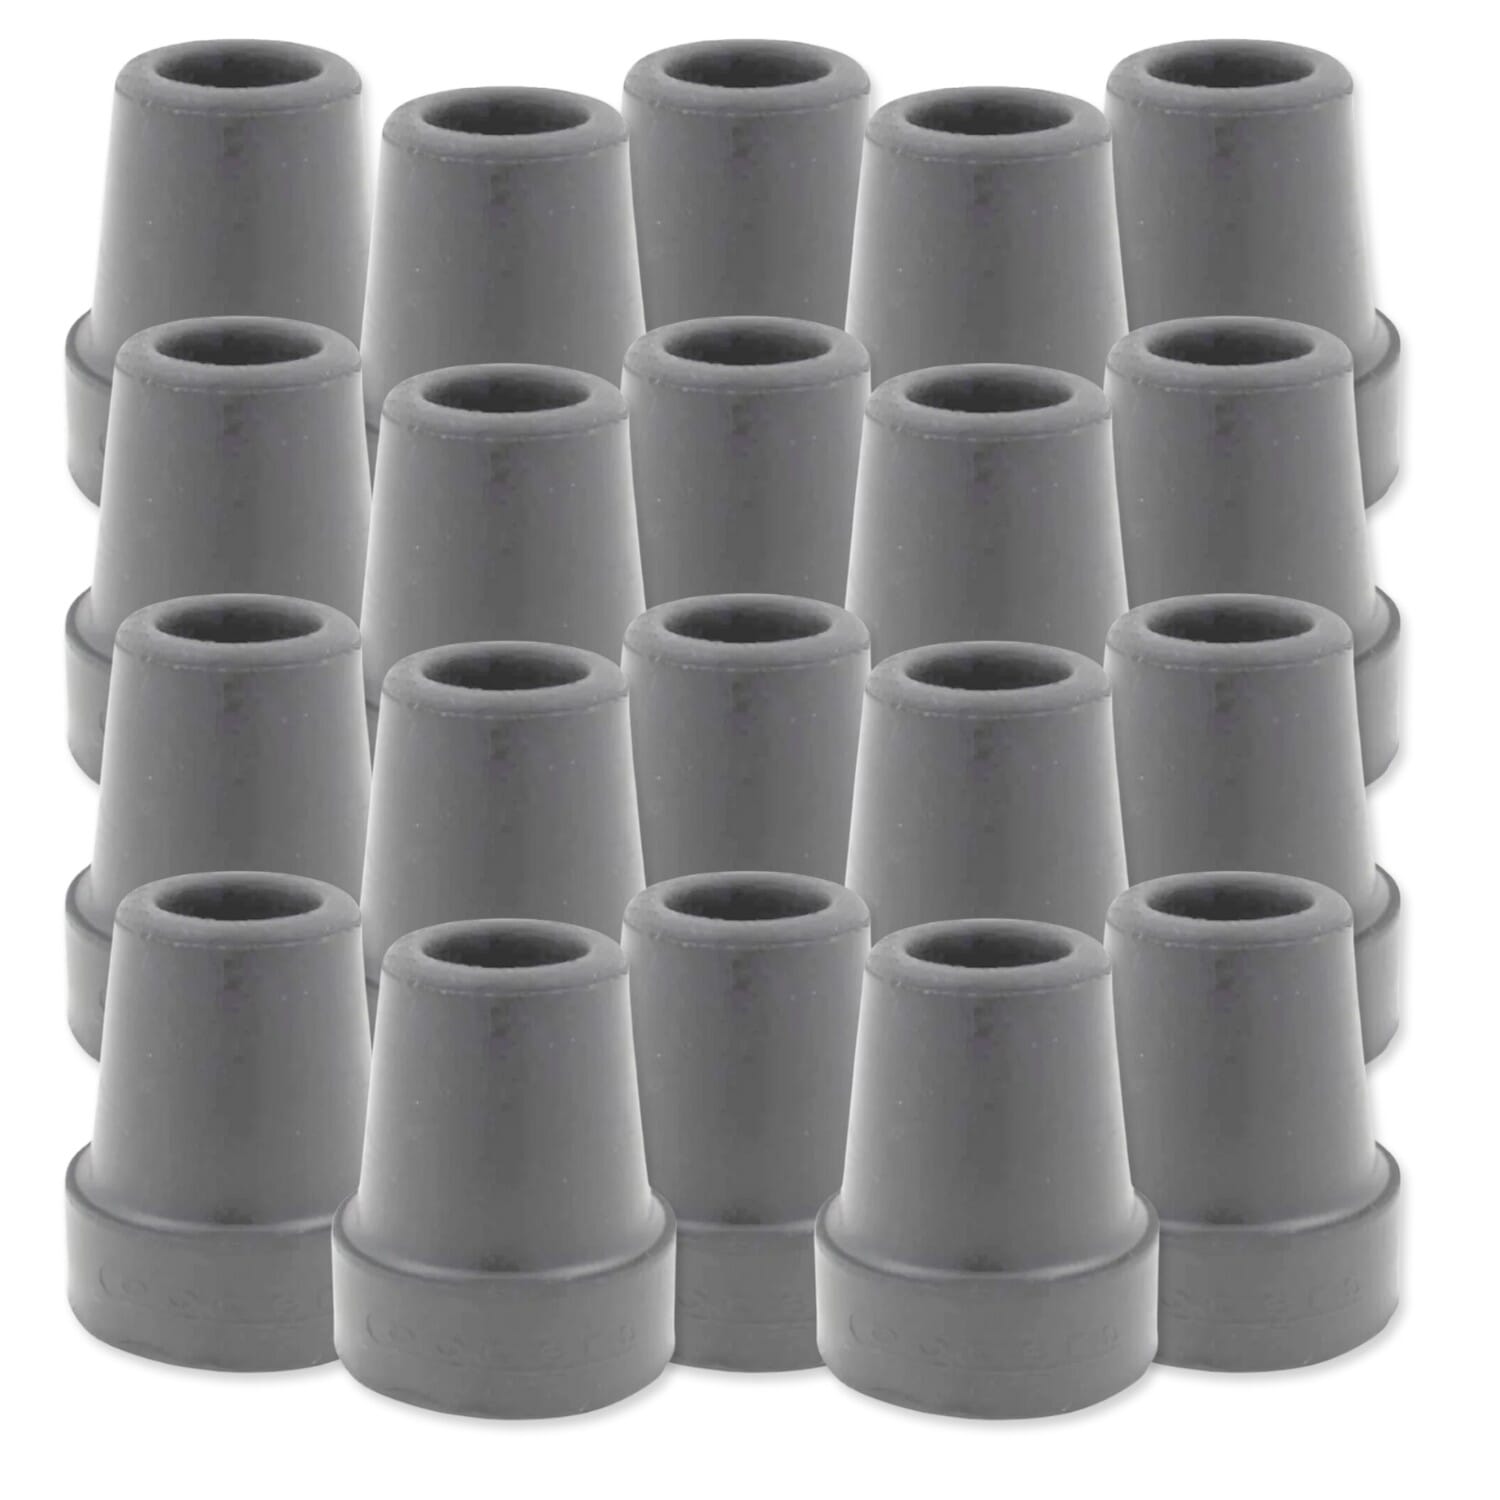 View Rubber Ends For Walking Sticks Rubber Ferrules 19mm grey pack of 20 information